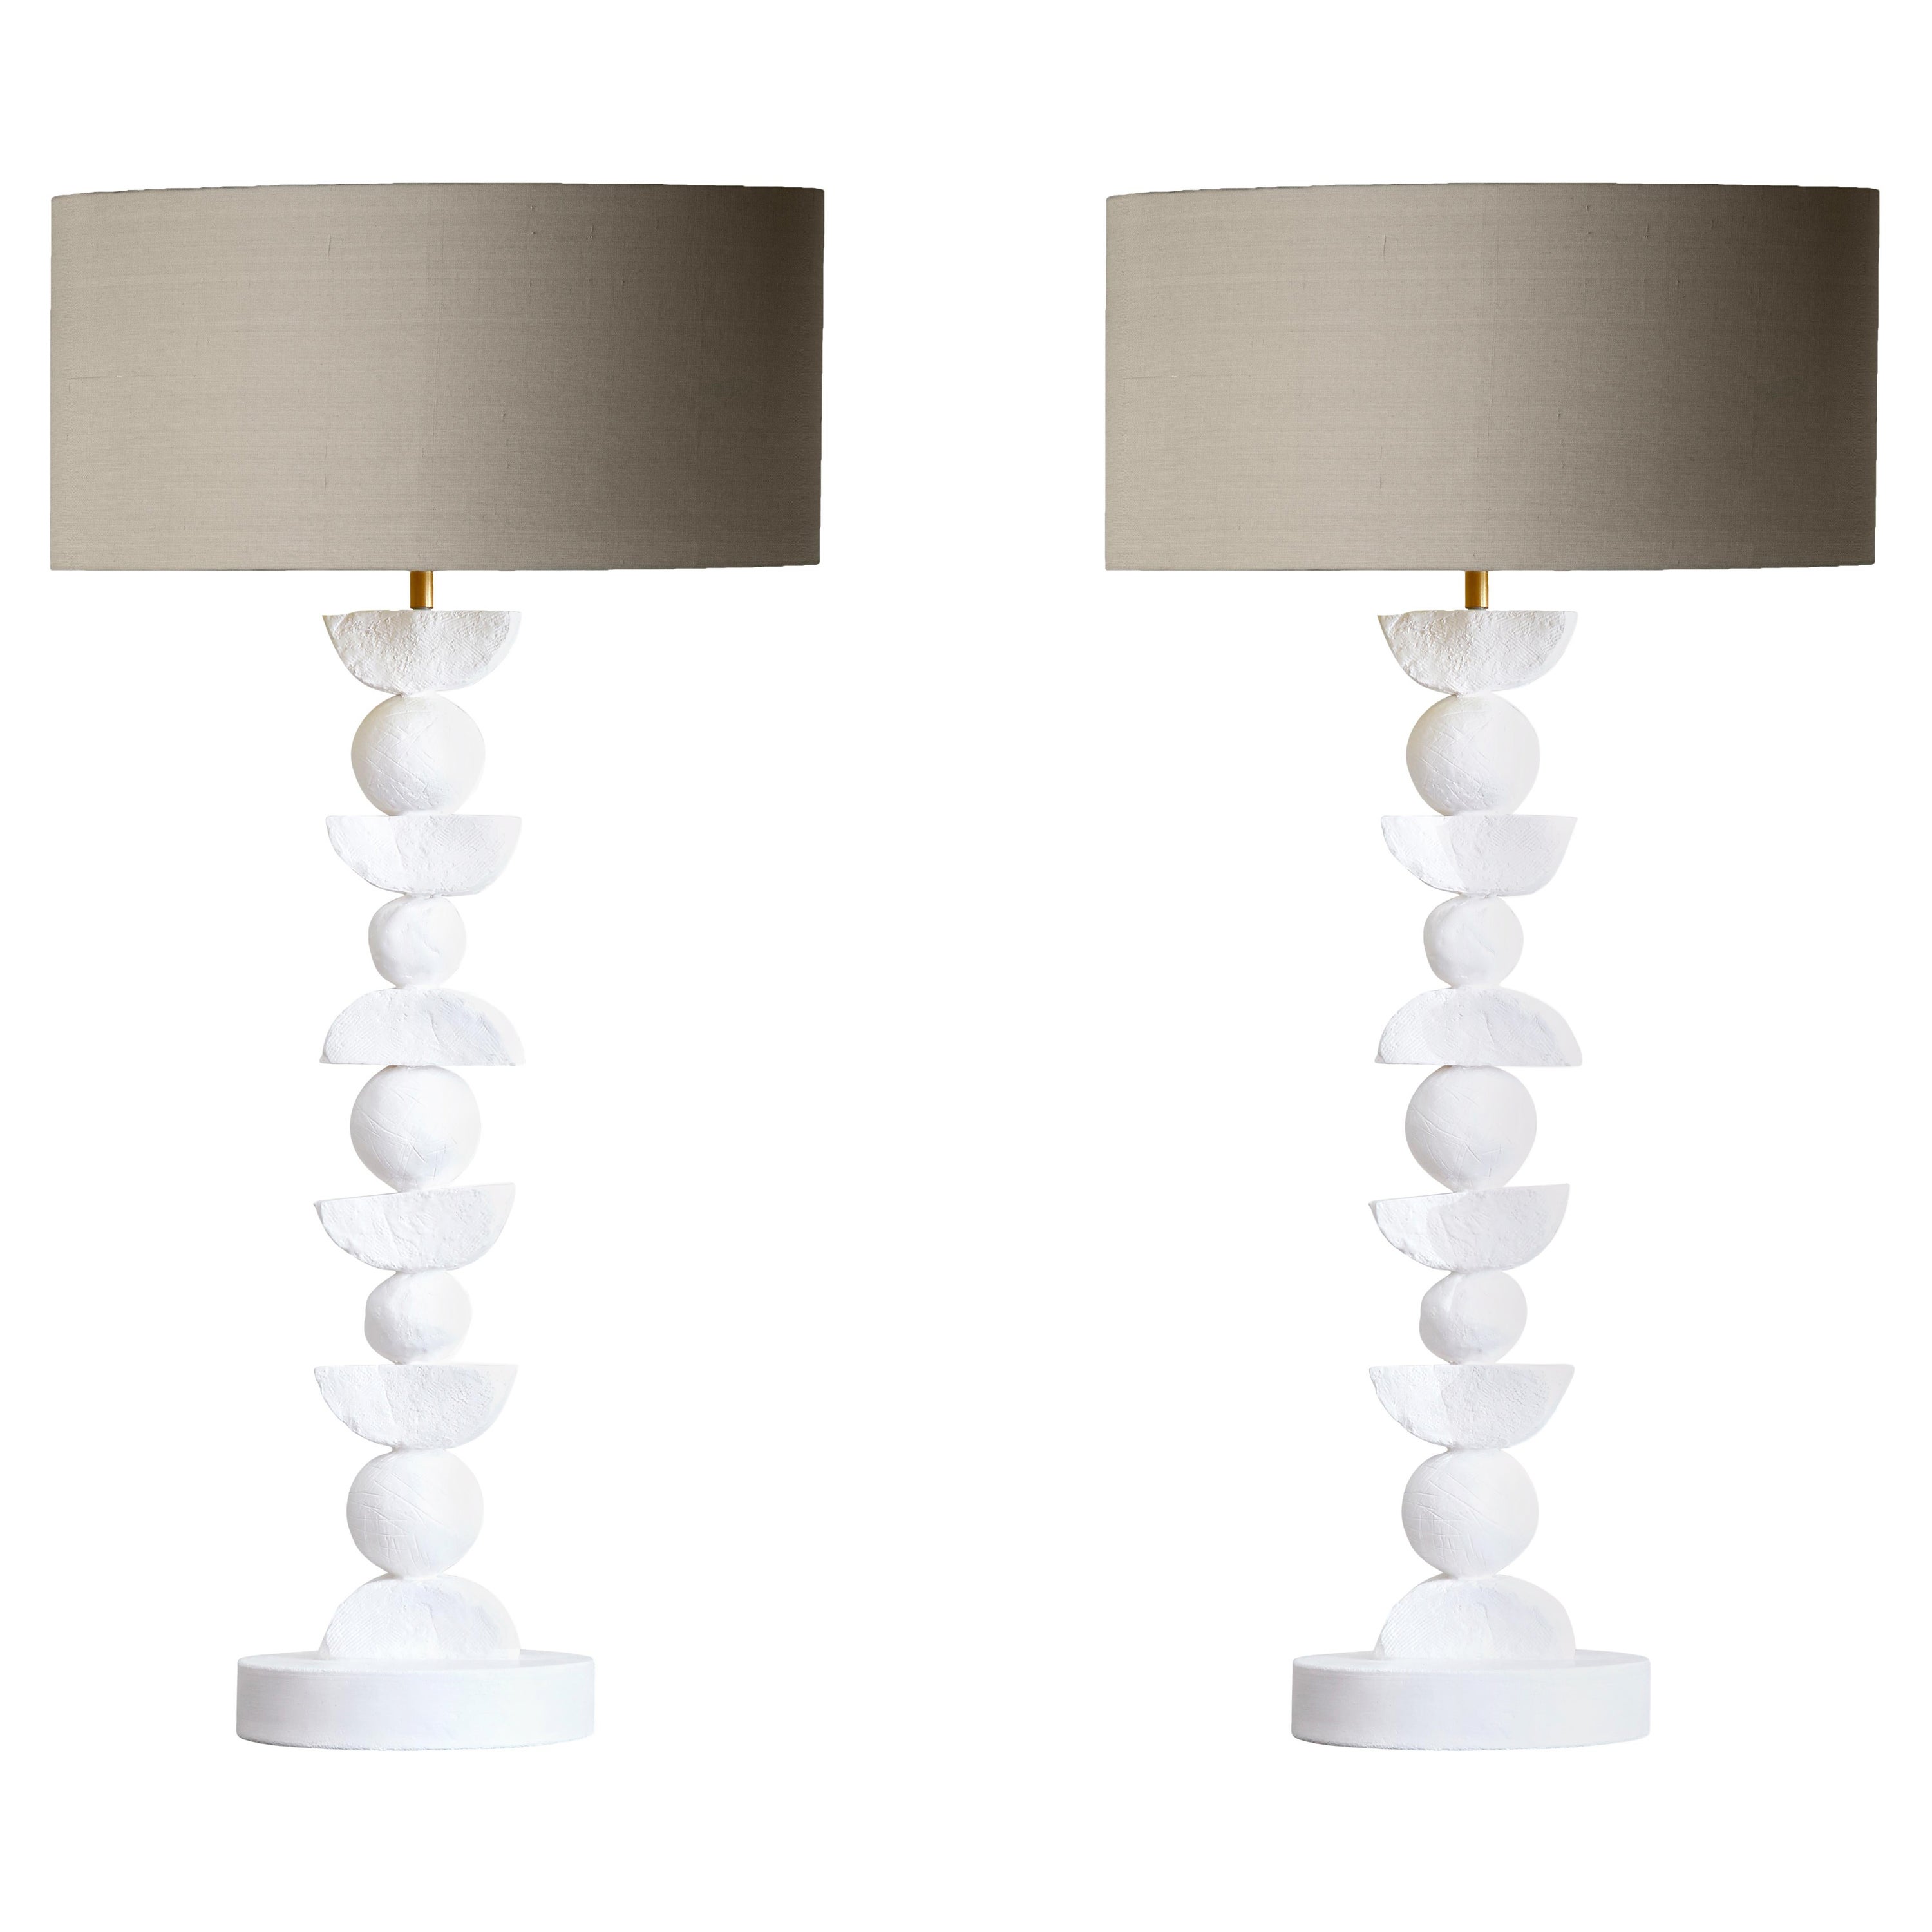 Sculptural, Organic, Textured Silhouette Table Lamp by Margit Wittig in White For Sale